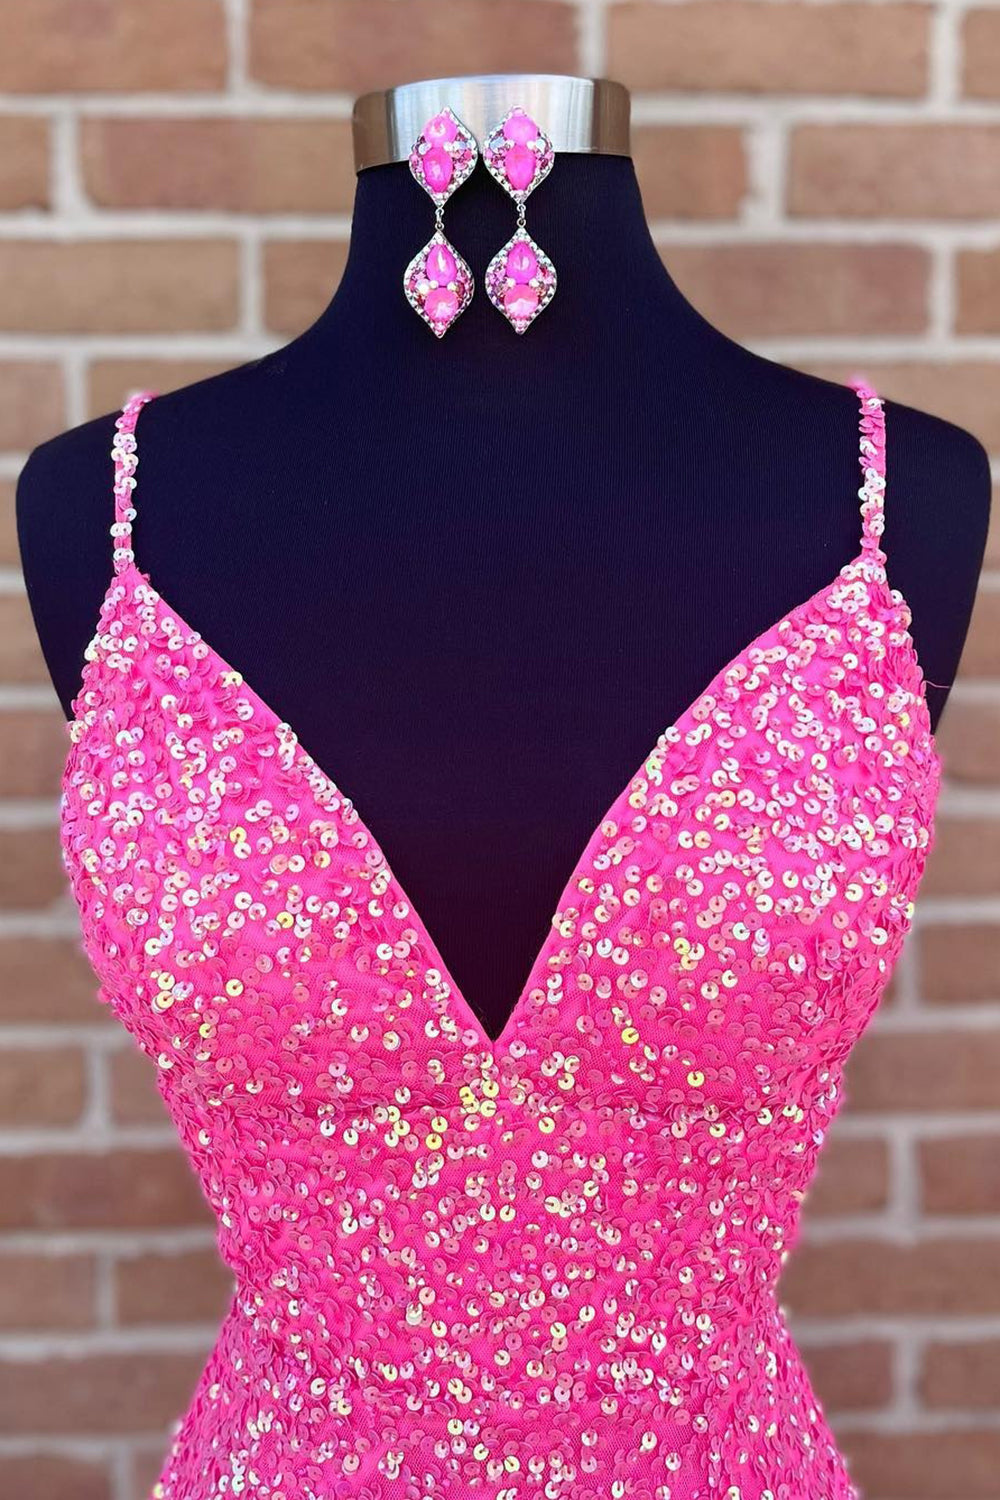 Fairy Dress, Spaghetti Straps Pink Sequins Short Homecoming Dress with Criss Cross Back